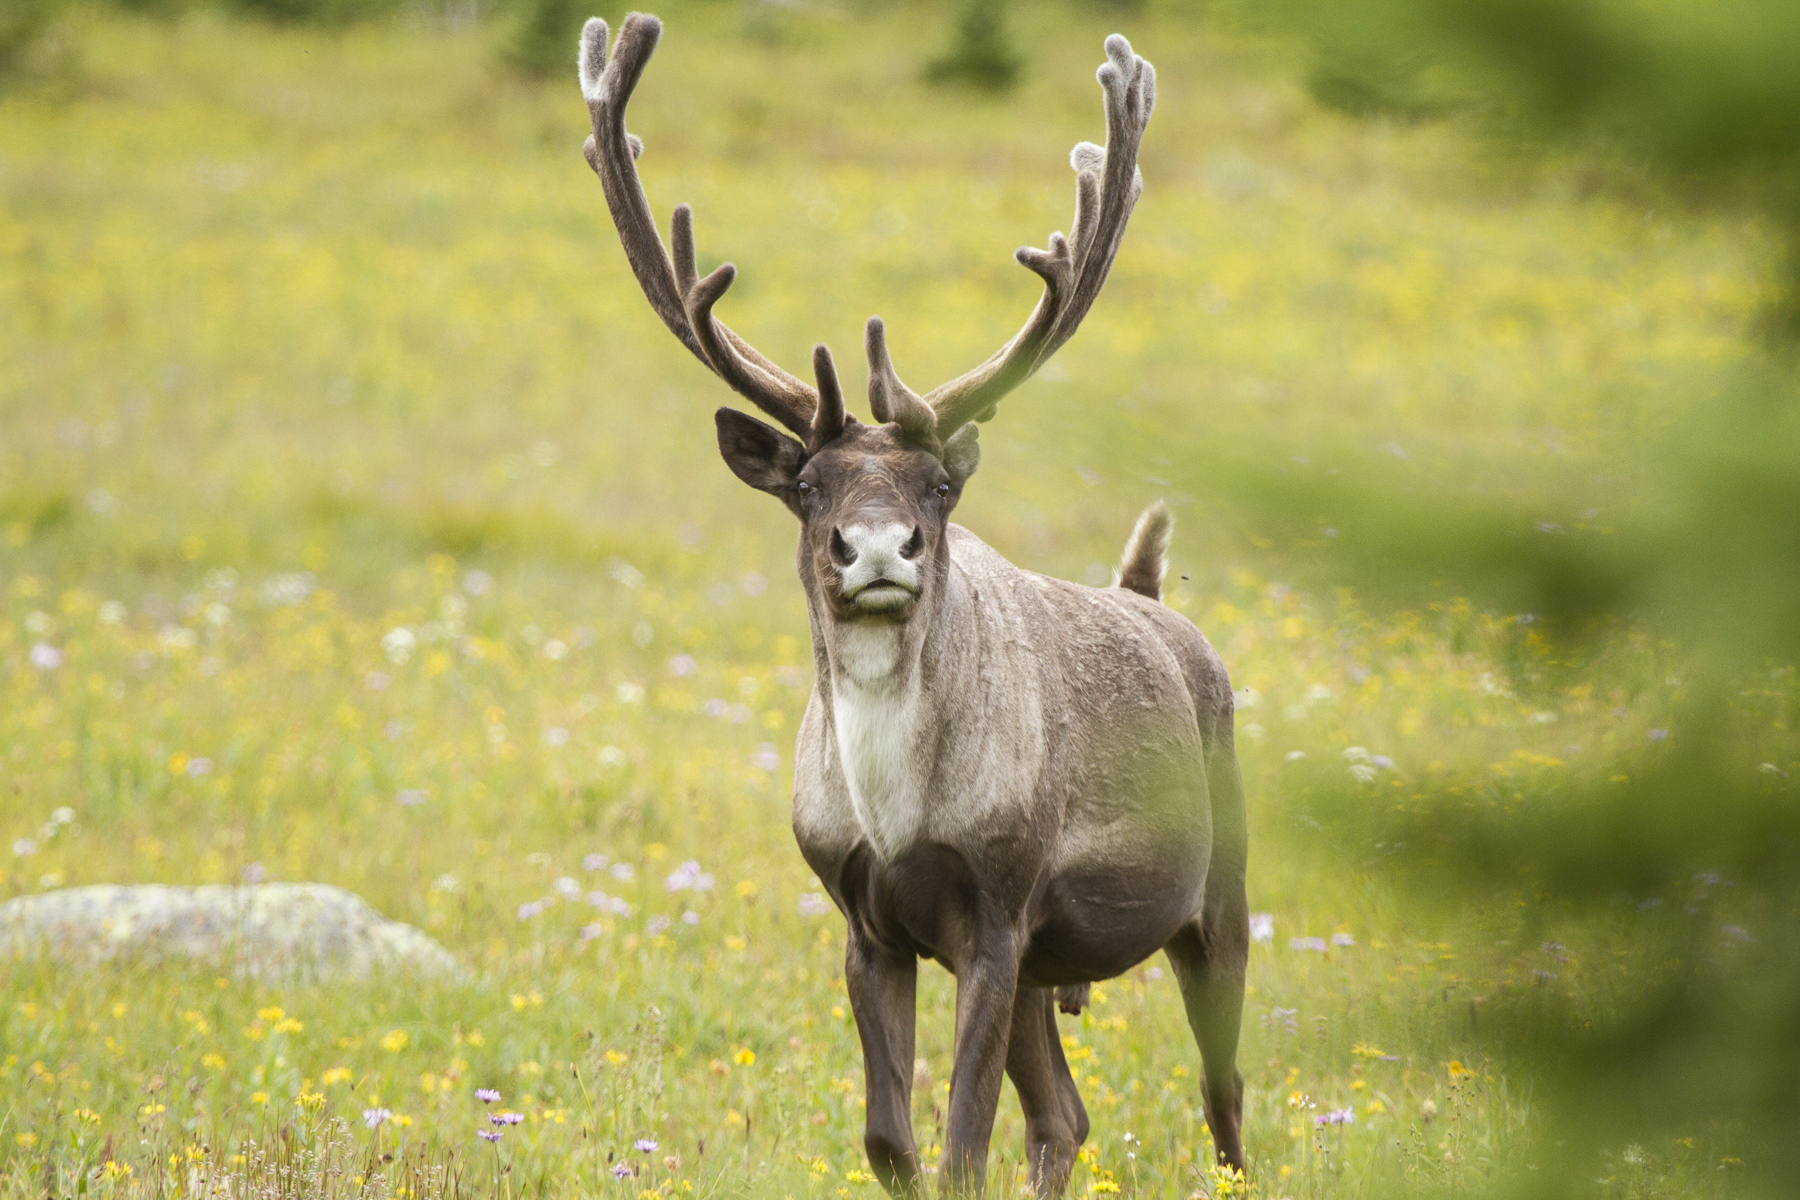 Mountain caribou with a large set of antlers walks through a field of wildflowers